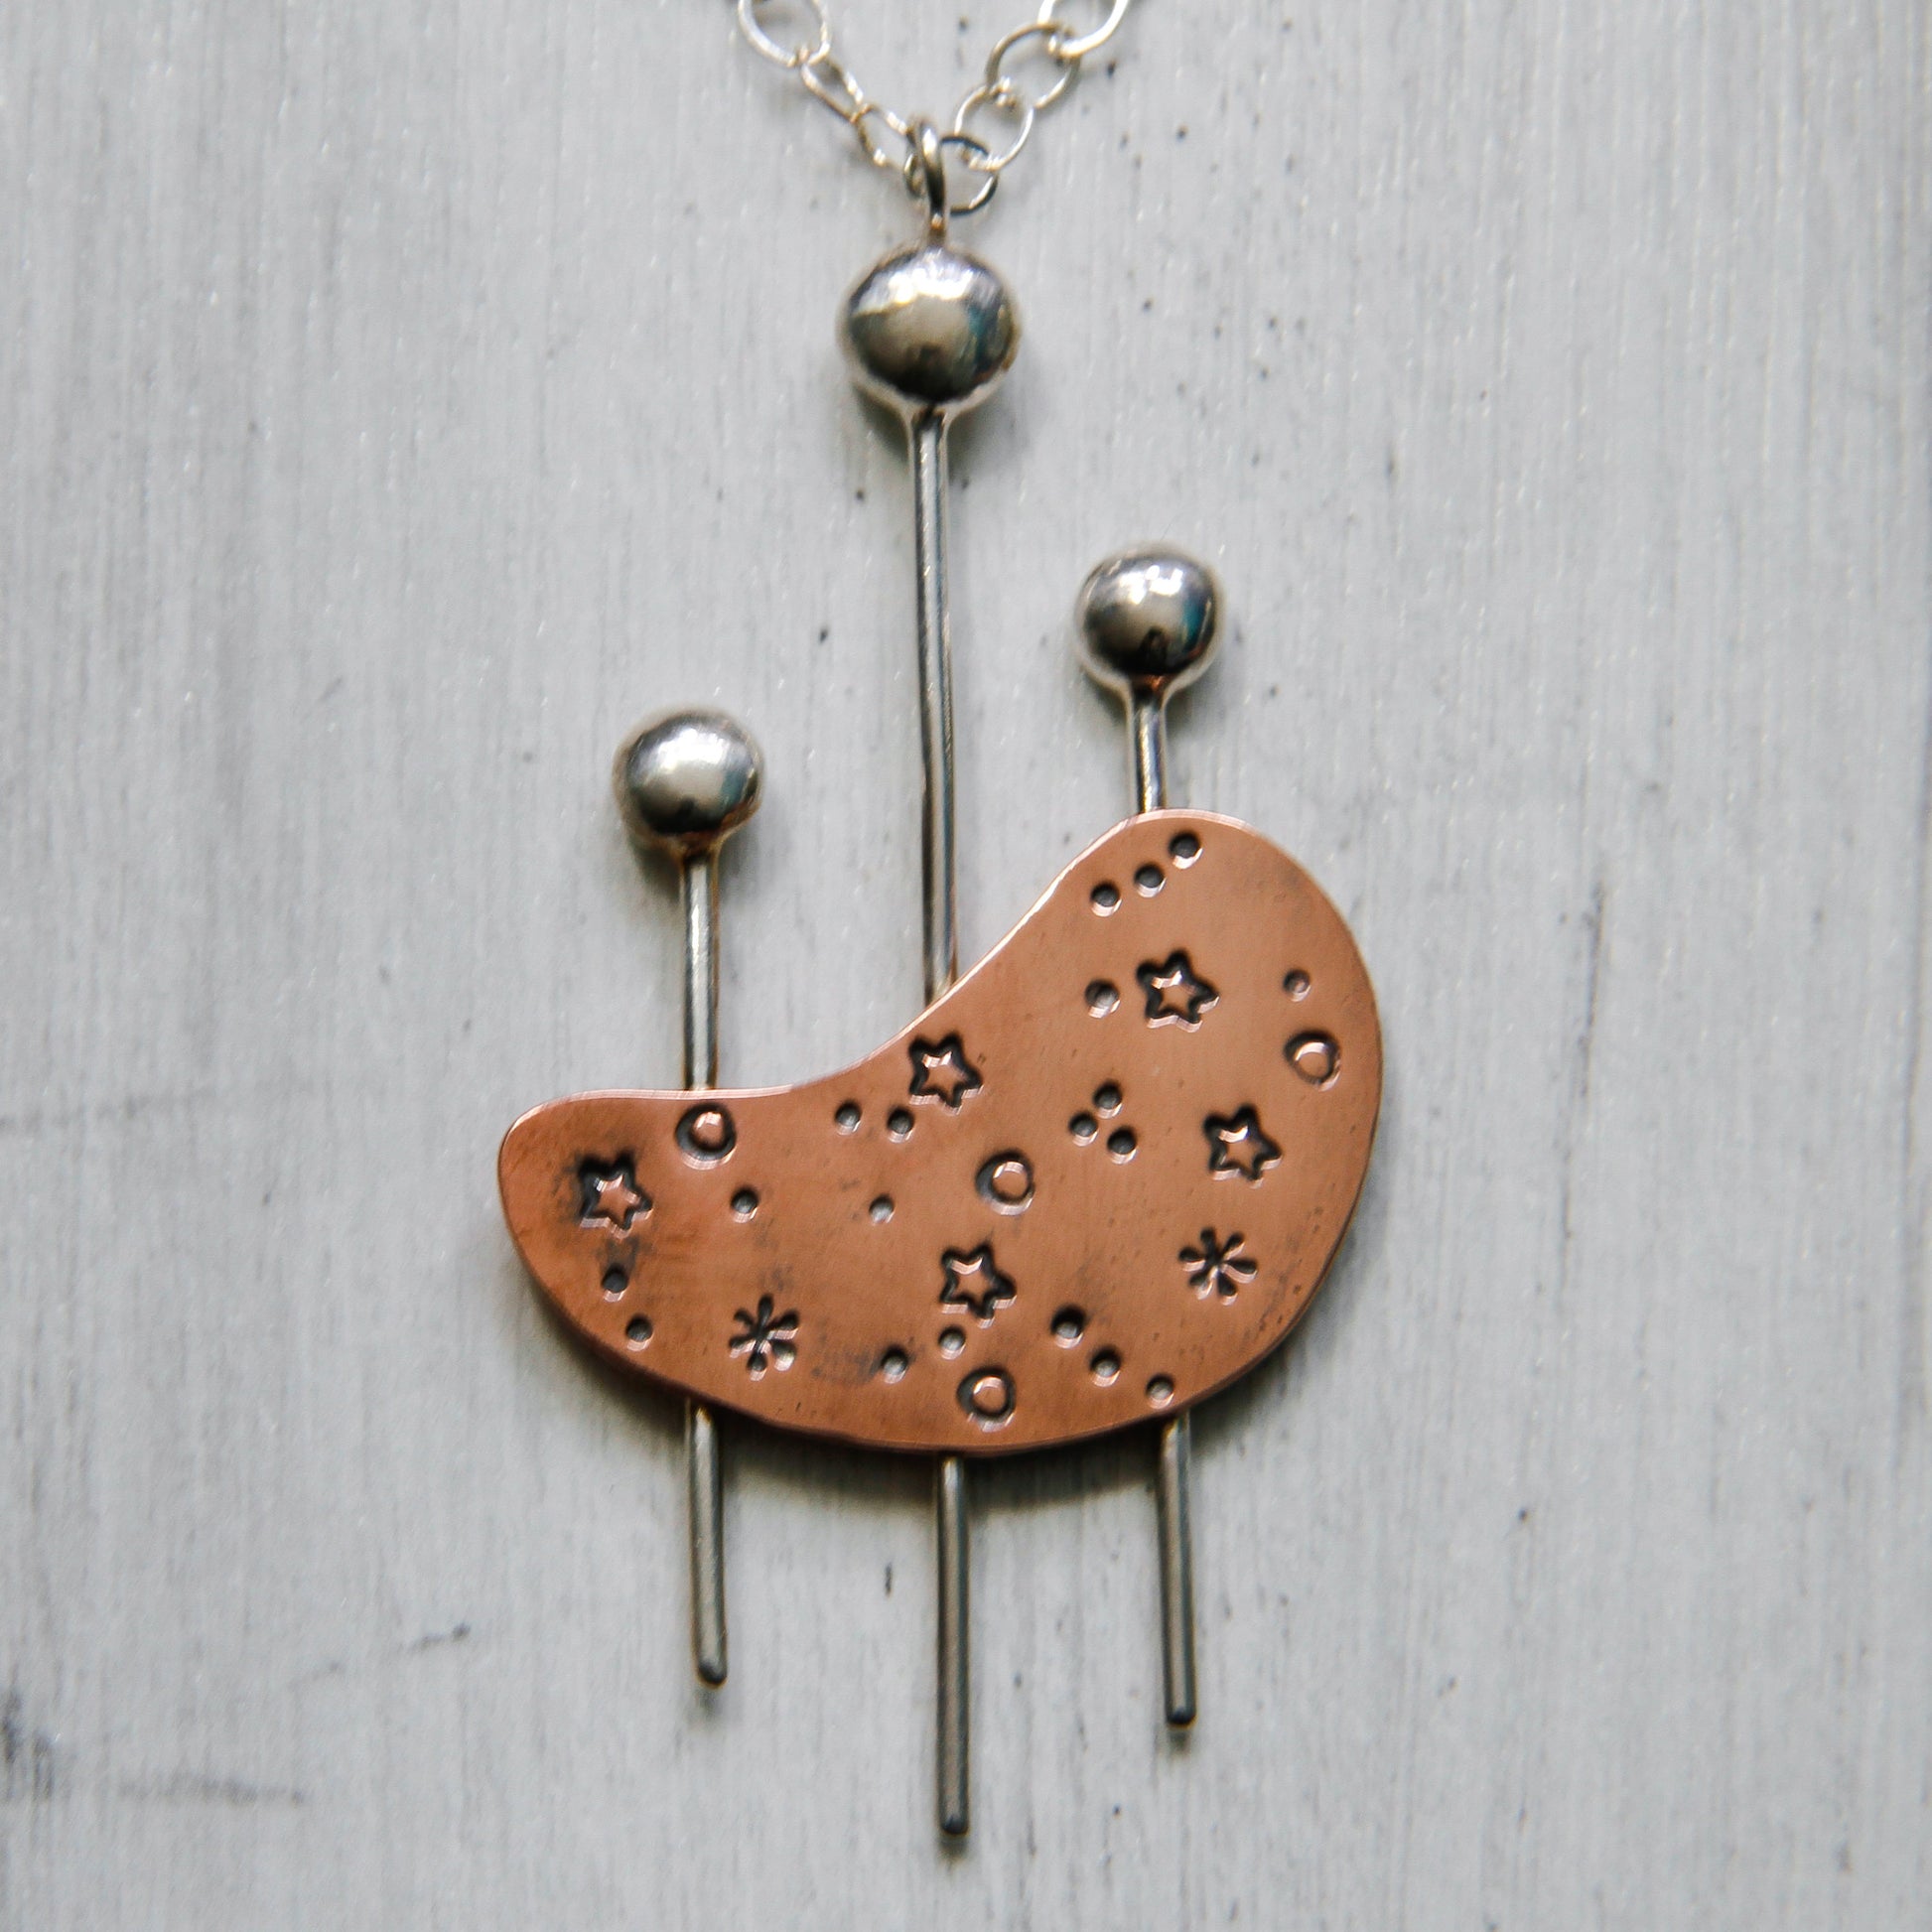 Kidney shaped copper and sterling silver necklace inspired by mid century modern design